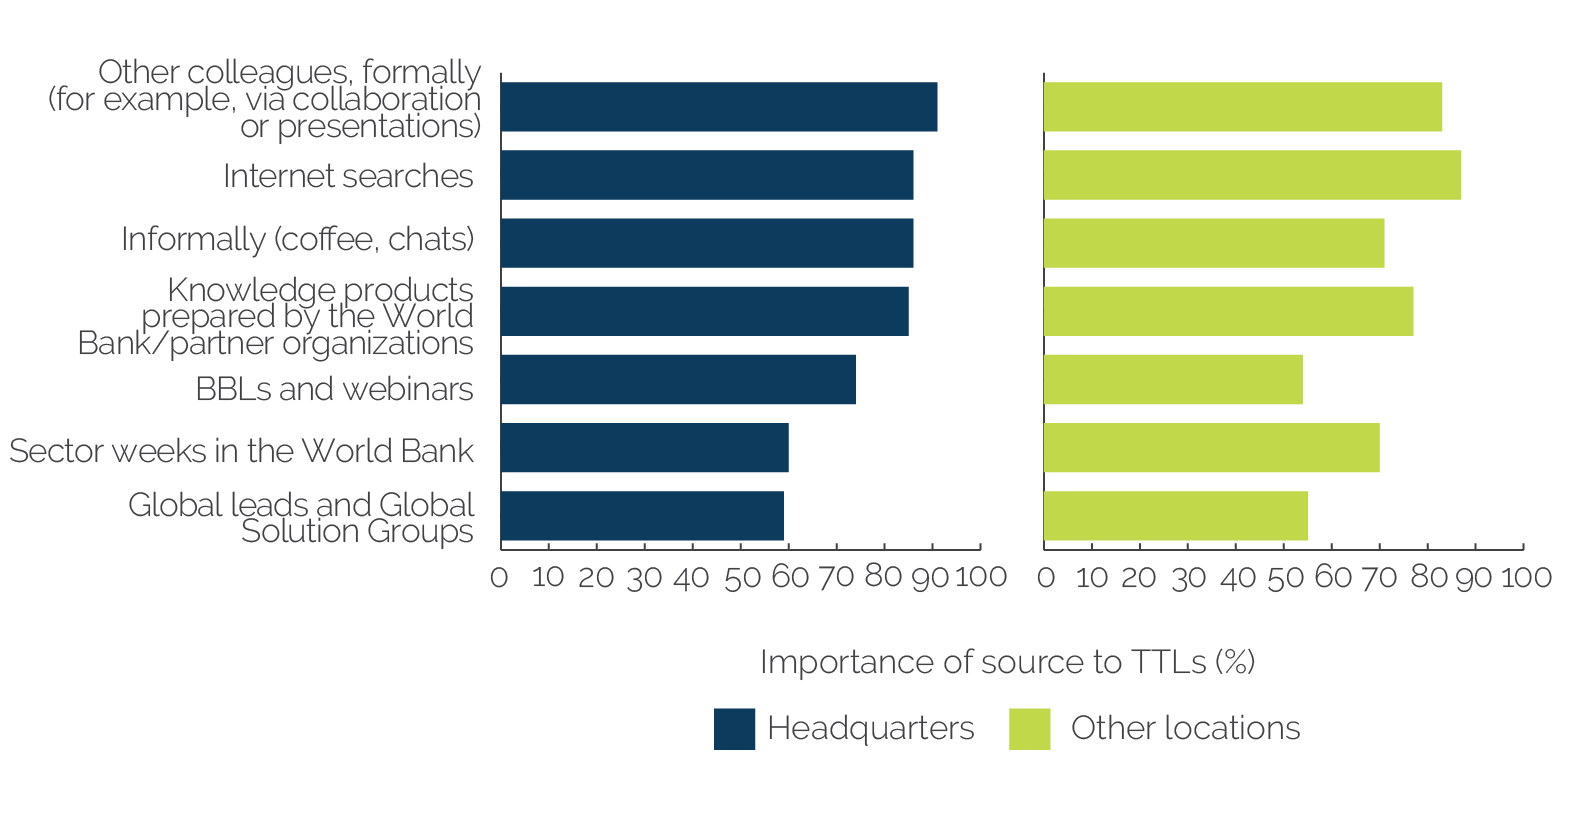 Horizontal bar graph showing the impact of staff’s location on sources of global knowledge: headquarters versus other locations.